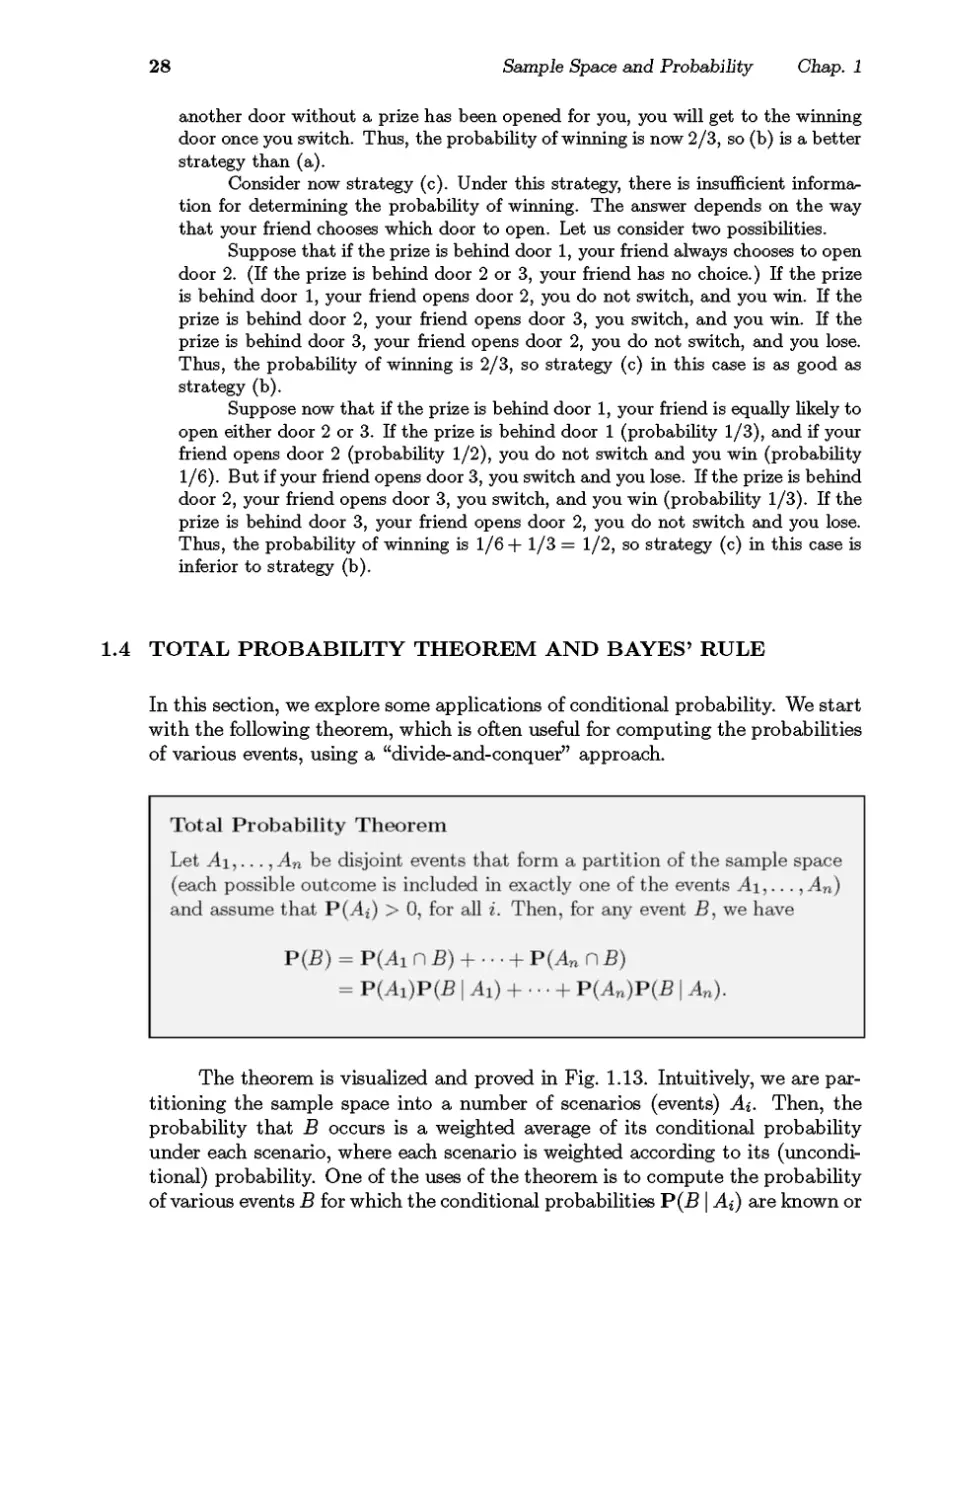 Total Probability Theorem and Bayes' Rule